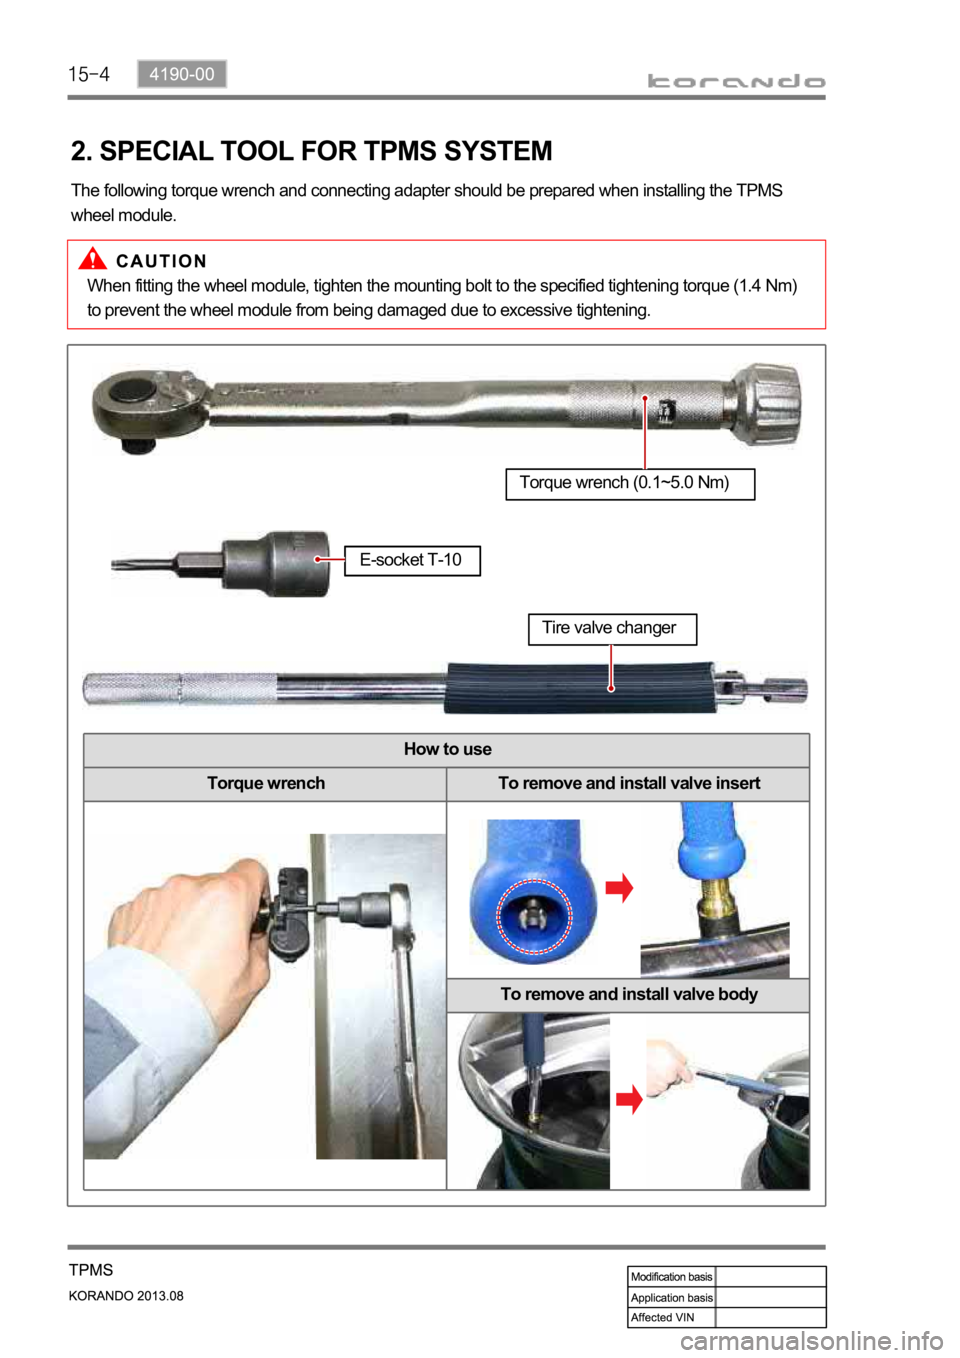 SSANGYONG KORANDO 2013  Service Manual How to use
Torque wrench To remove and install valve insert
To remove and install valve body
2. SPECIAL TOOL FOR TPMS SYSTEM
The following torque wrench and connecting adapter should be prepared when 